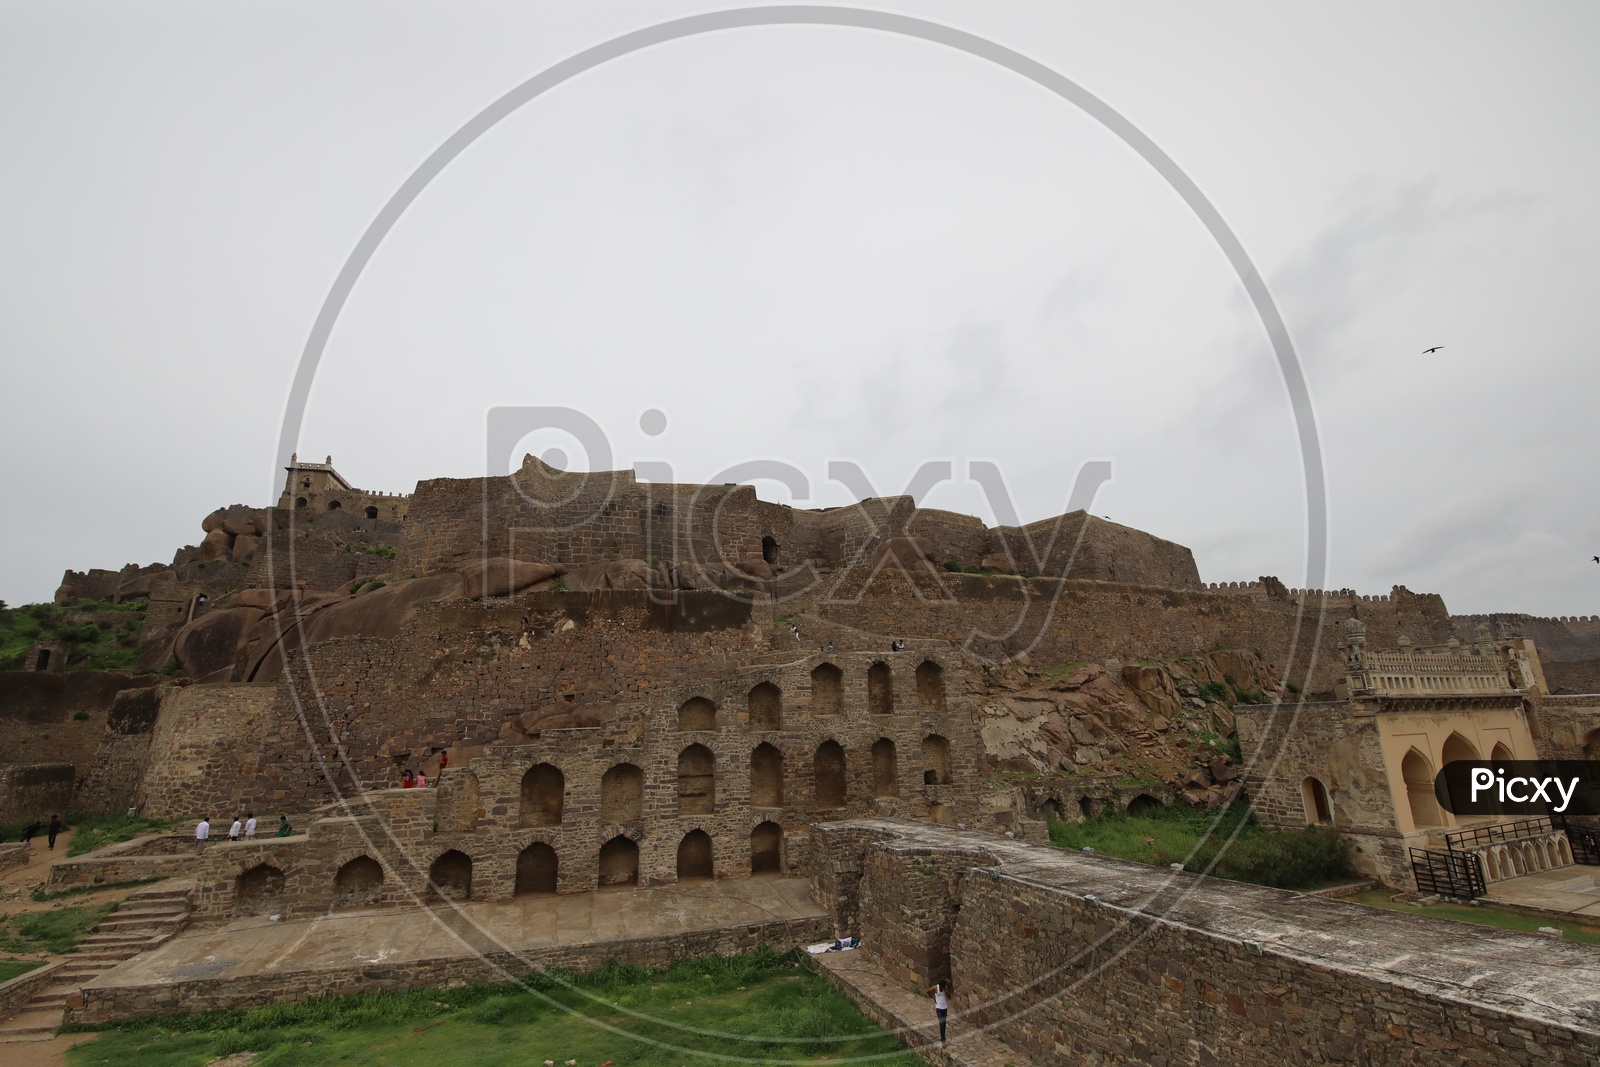 Landscape of  the Iconic Golconda Fort / Historical Architecture of Golconda Fort